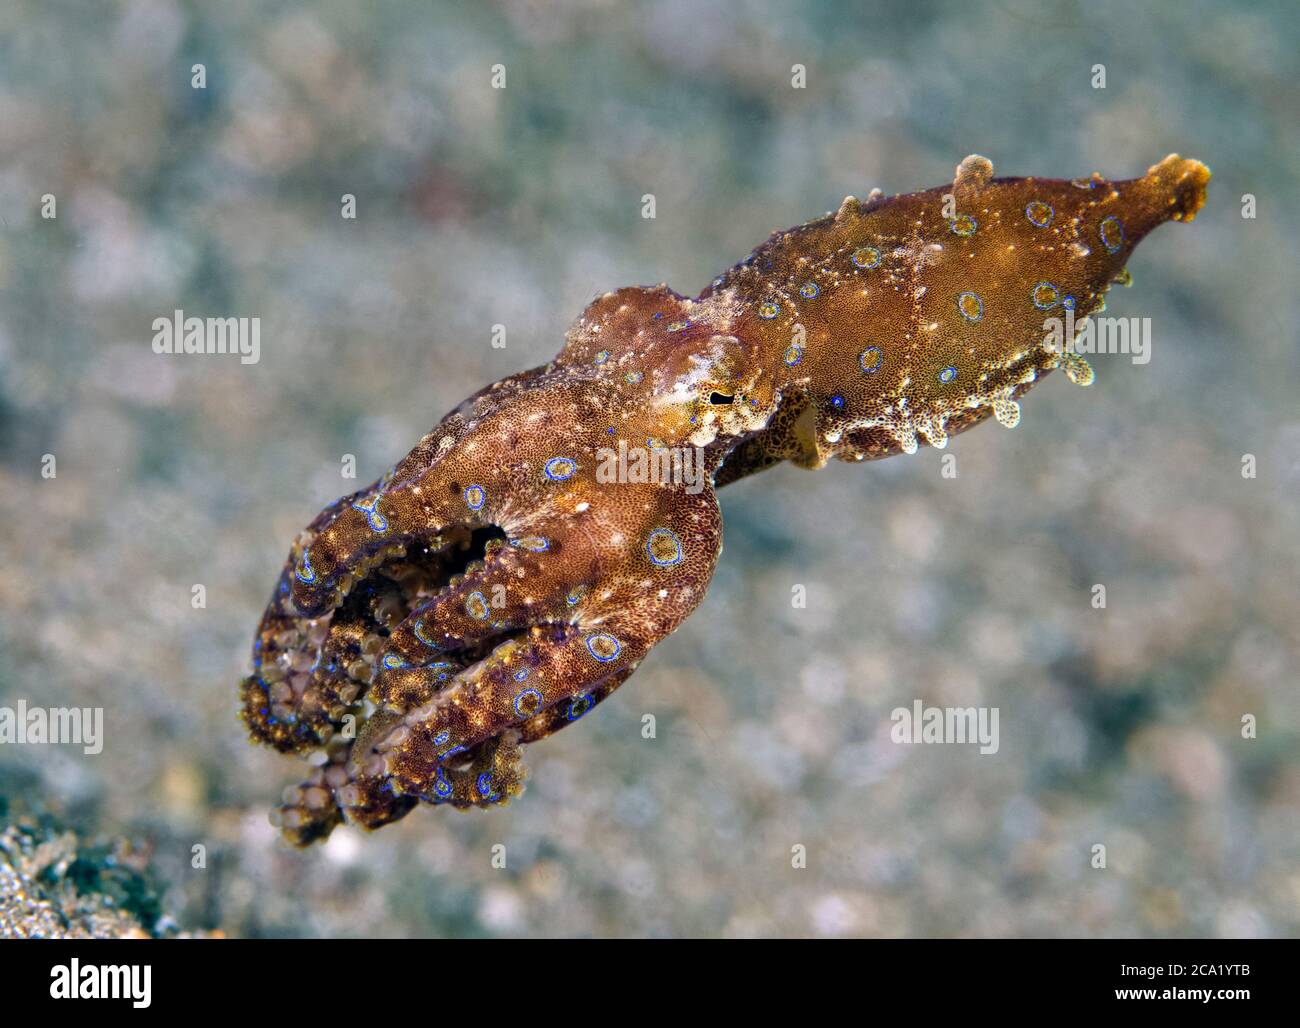 Blue-ringed Octopus, Hapalochlaena sp., flashing its warning colors as it swims, Anilao, Batangas, Philippines.  Pacific Ocean. Stock Photo